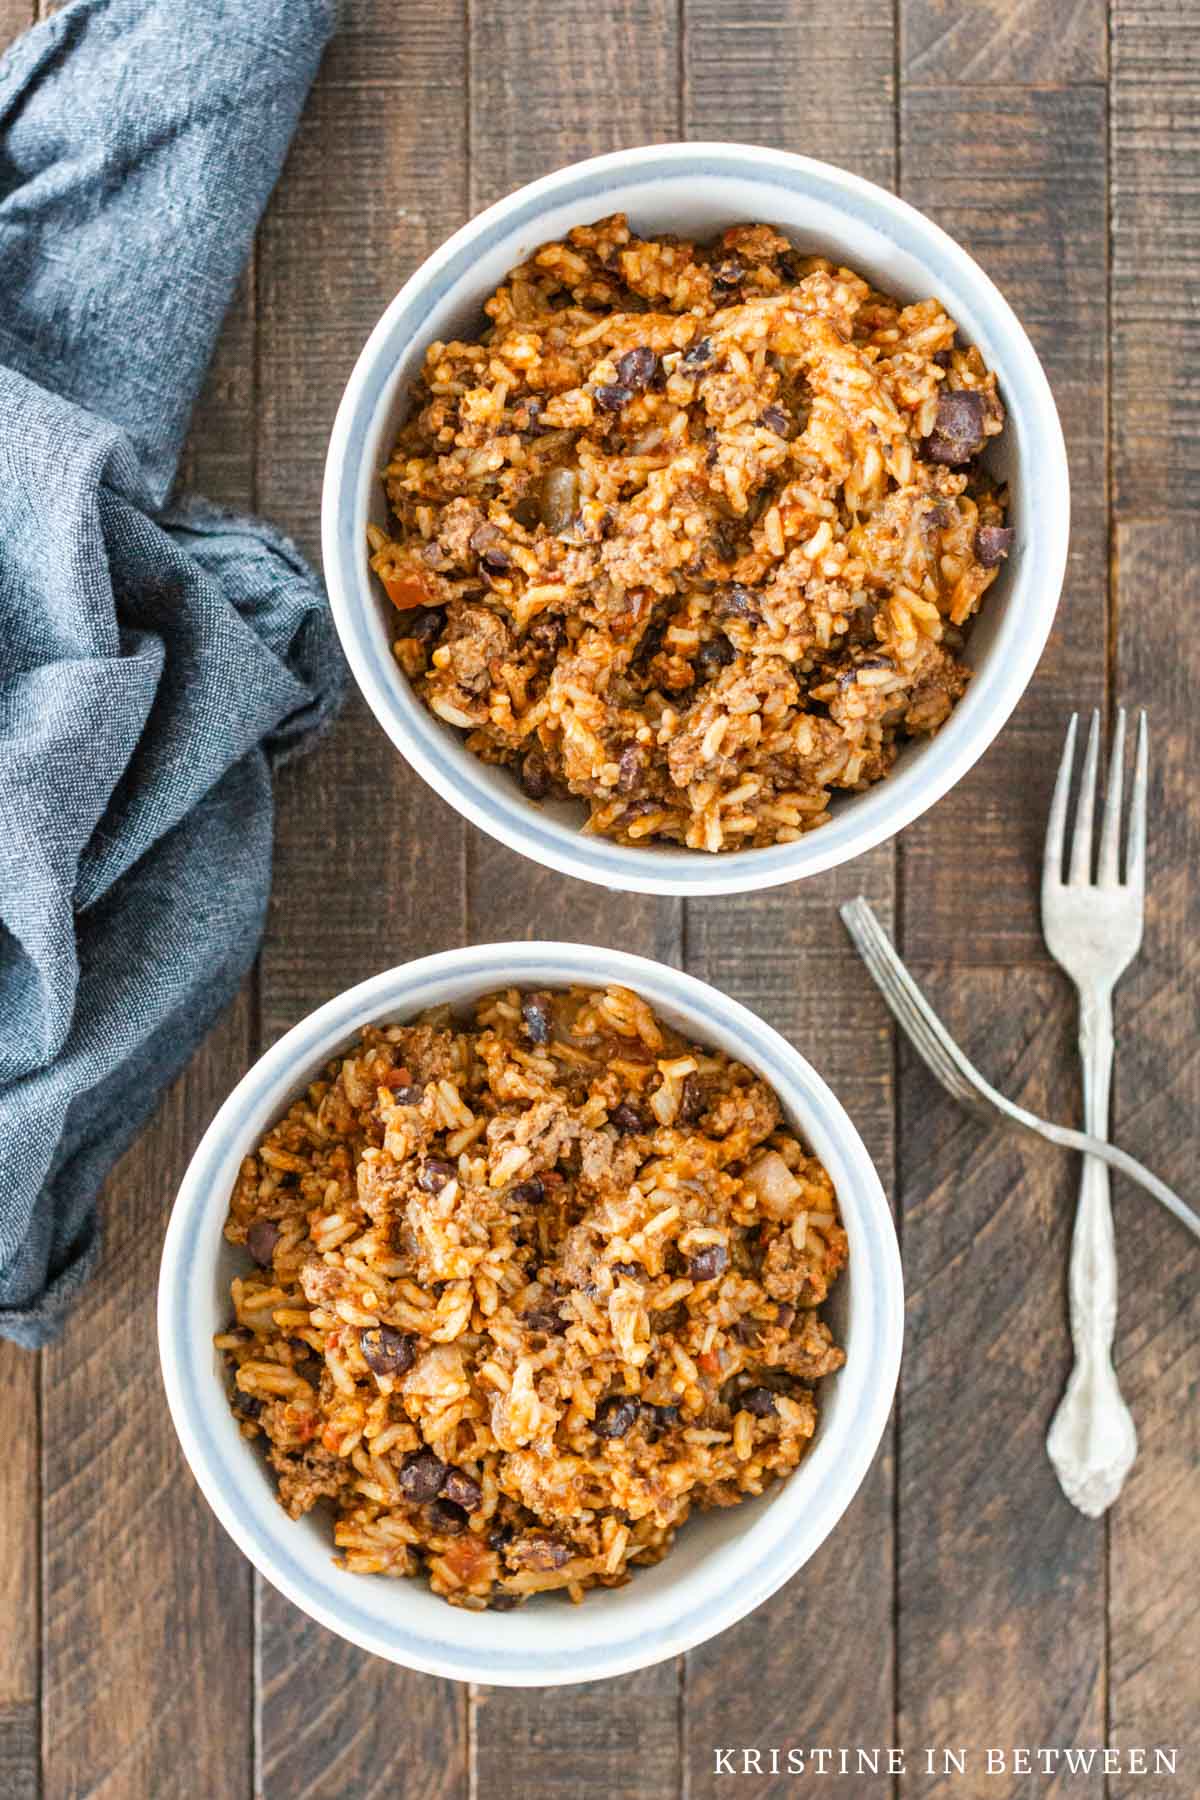 Two bowls of casserole with no toppings in white bowls with two forks sitting next to them.